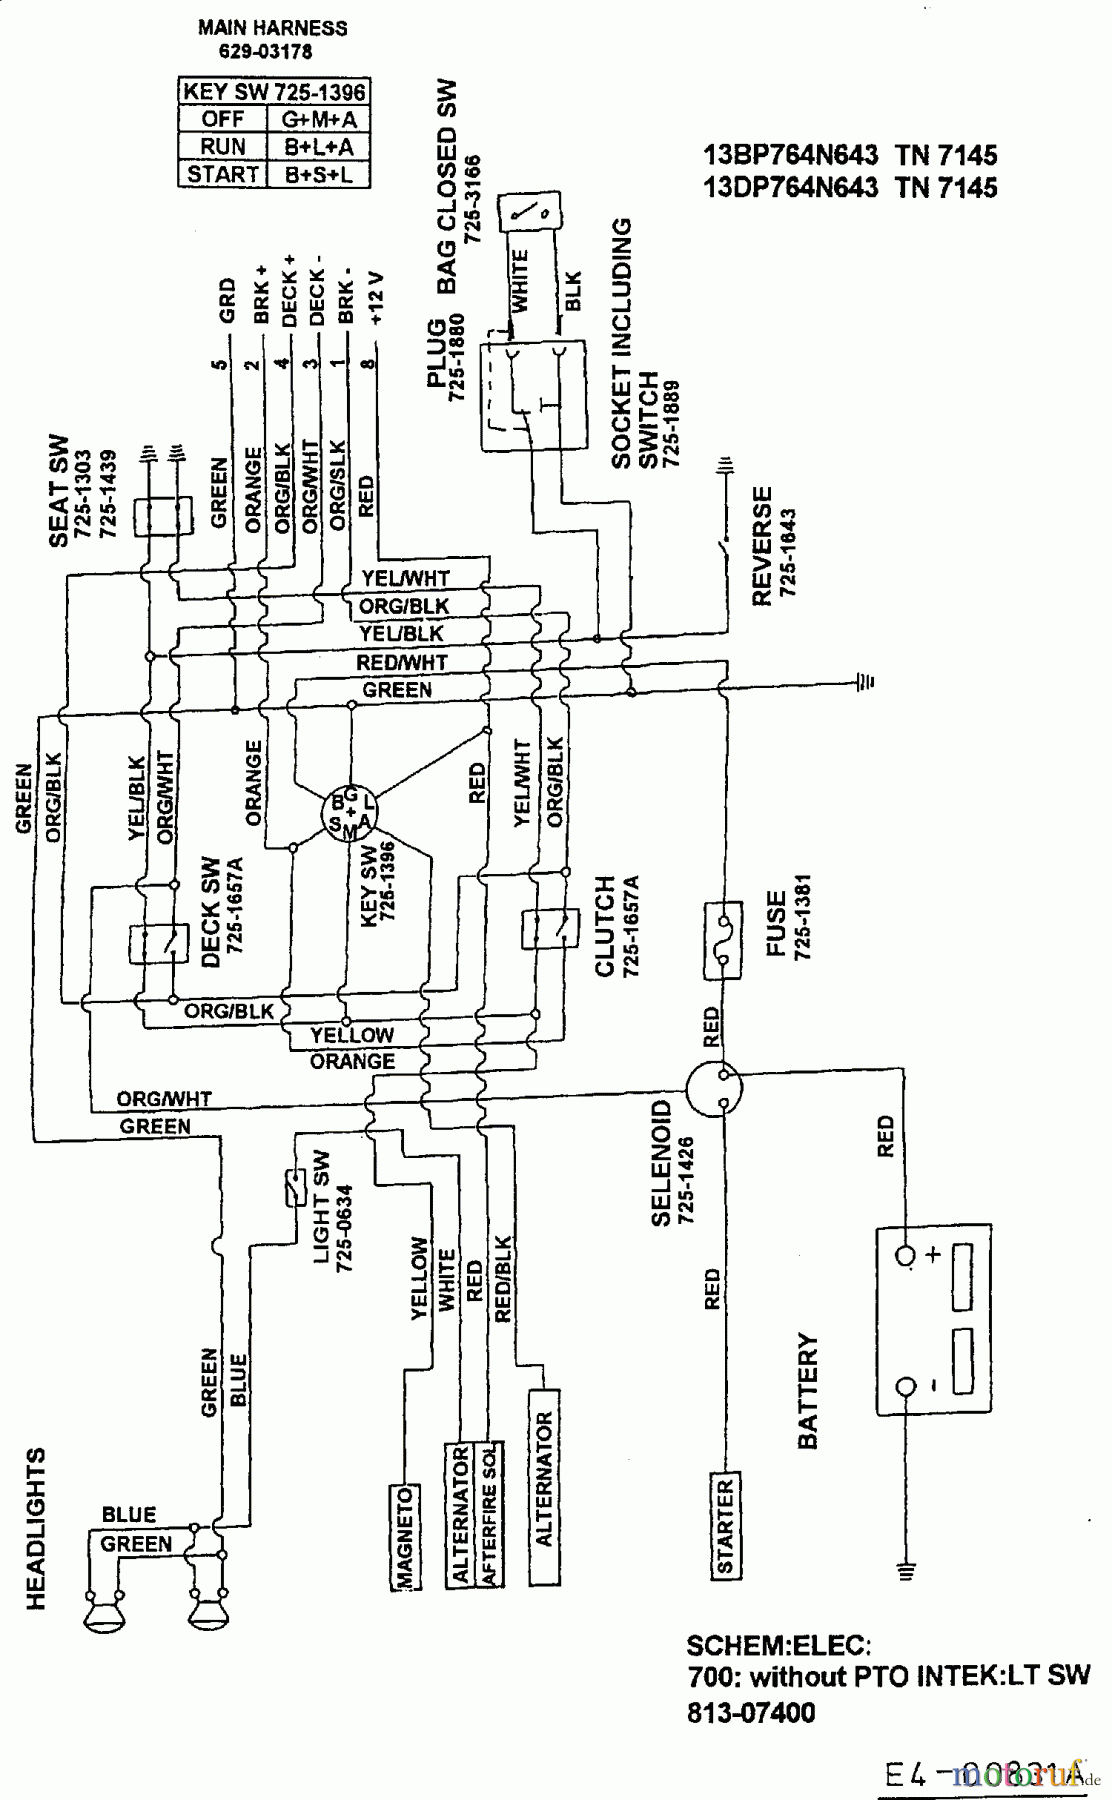  Gutbrod Lawn tractors Sprint 2000 13AN76GN604  (2001) Wiring diagram